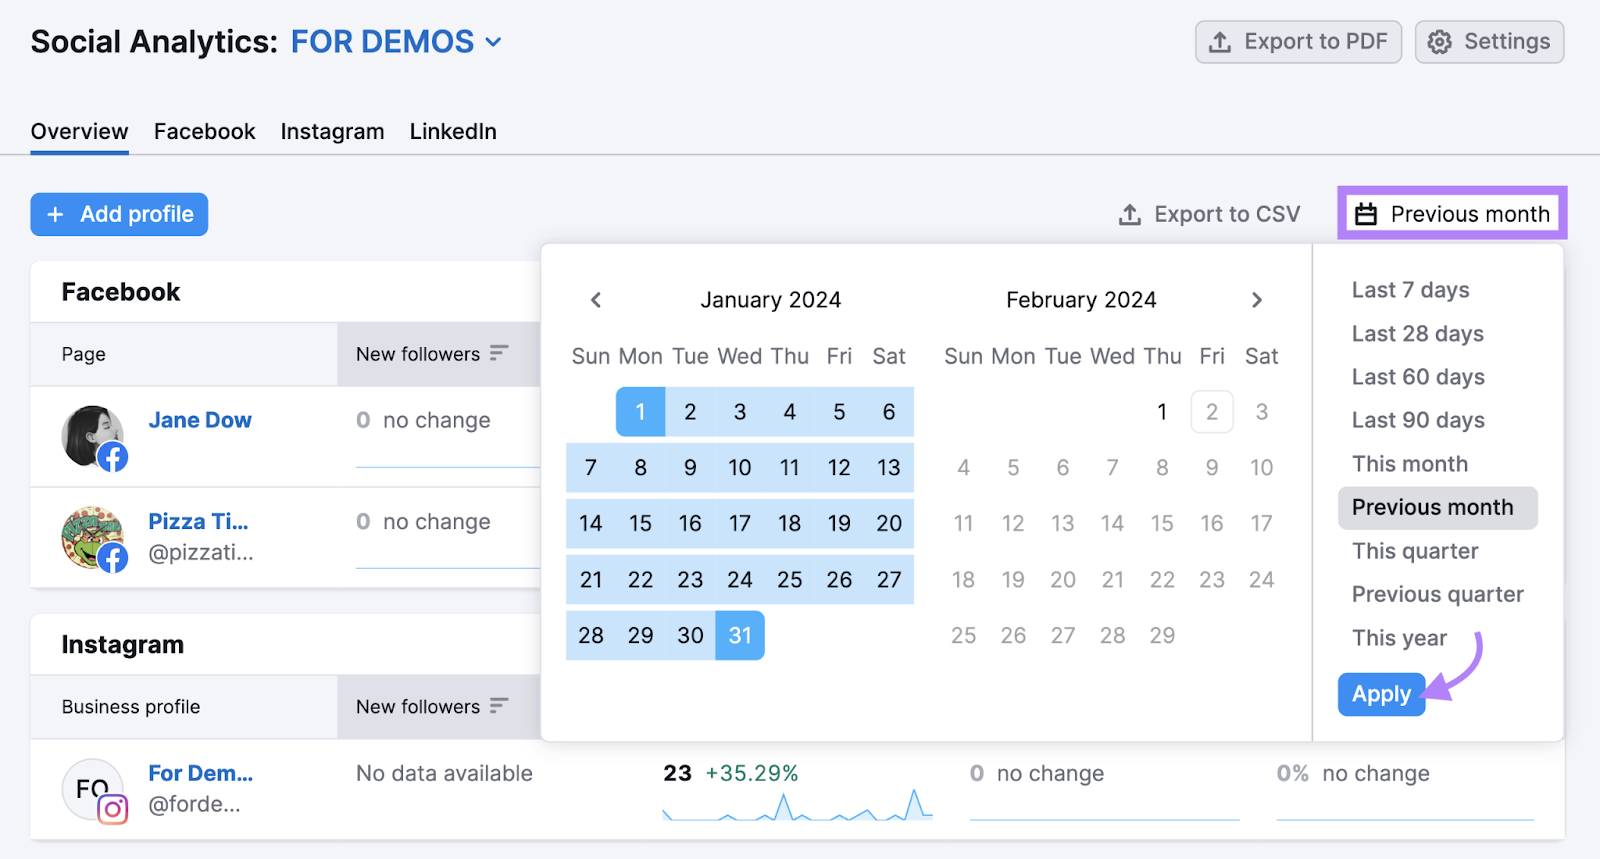 Set the time range you want to analyze in Social Analytics